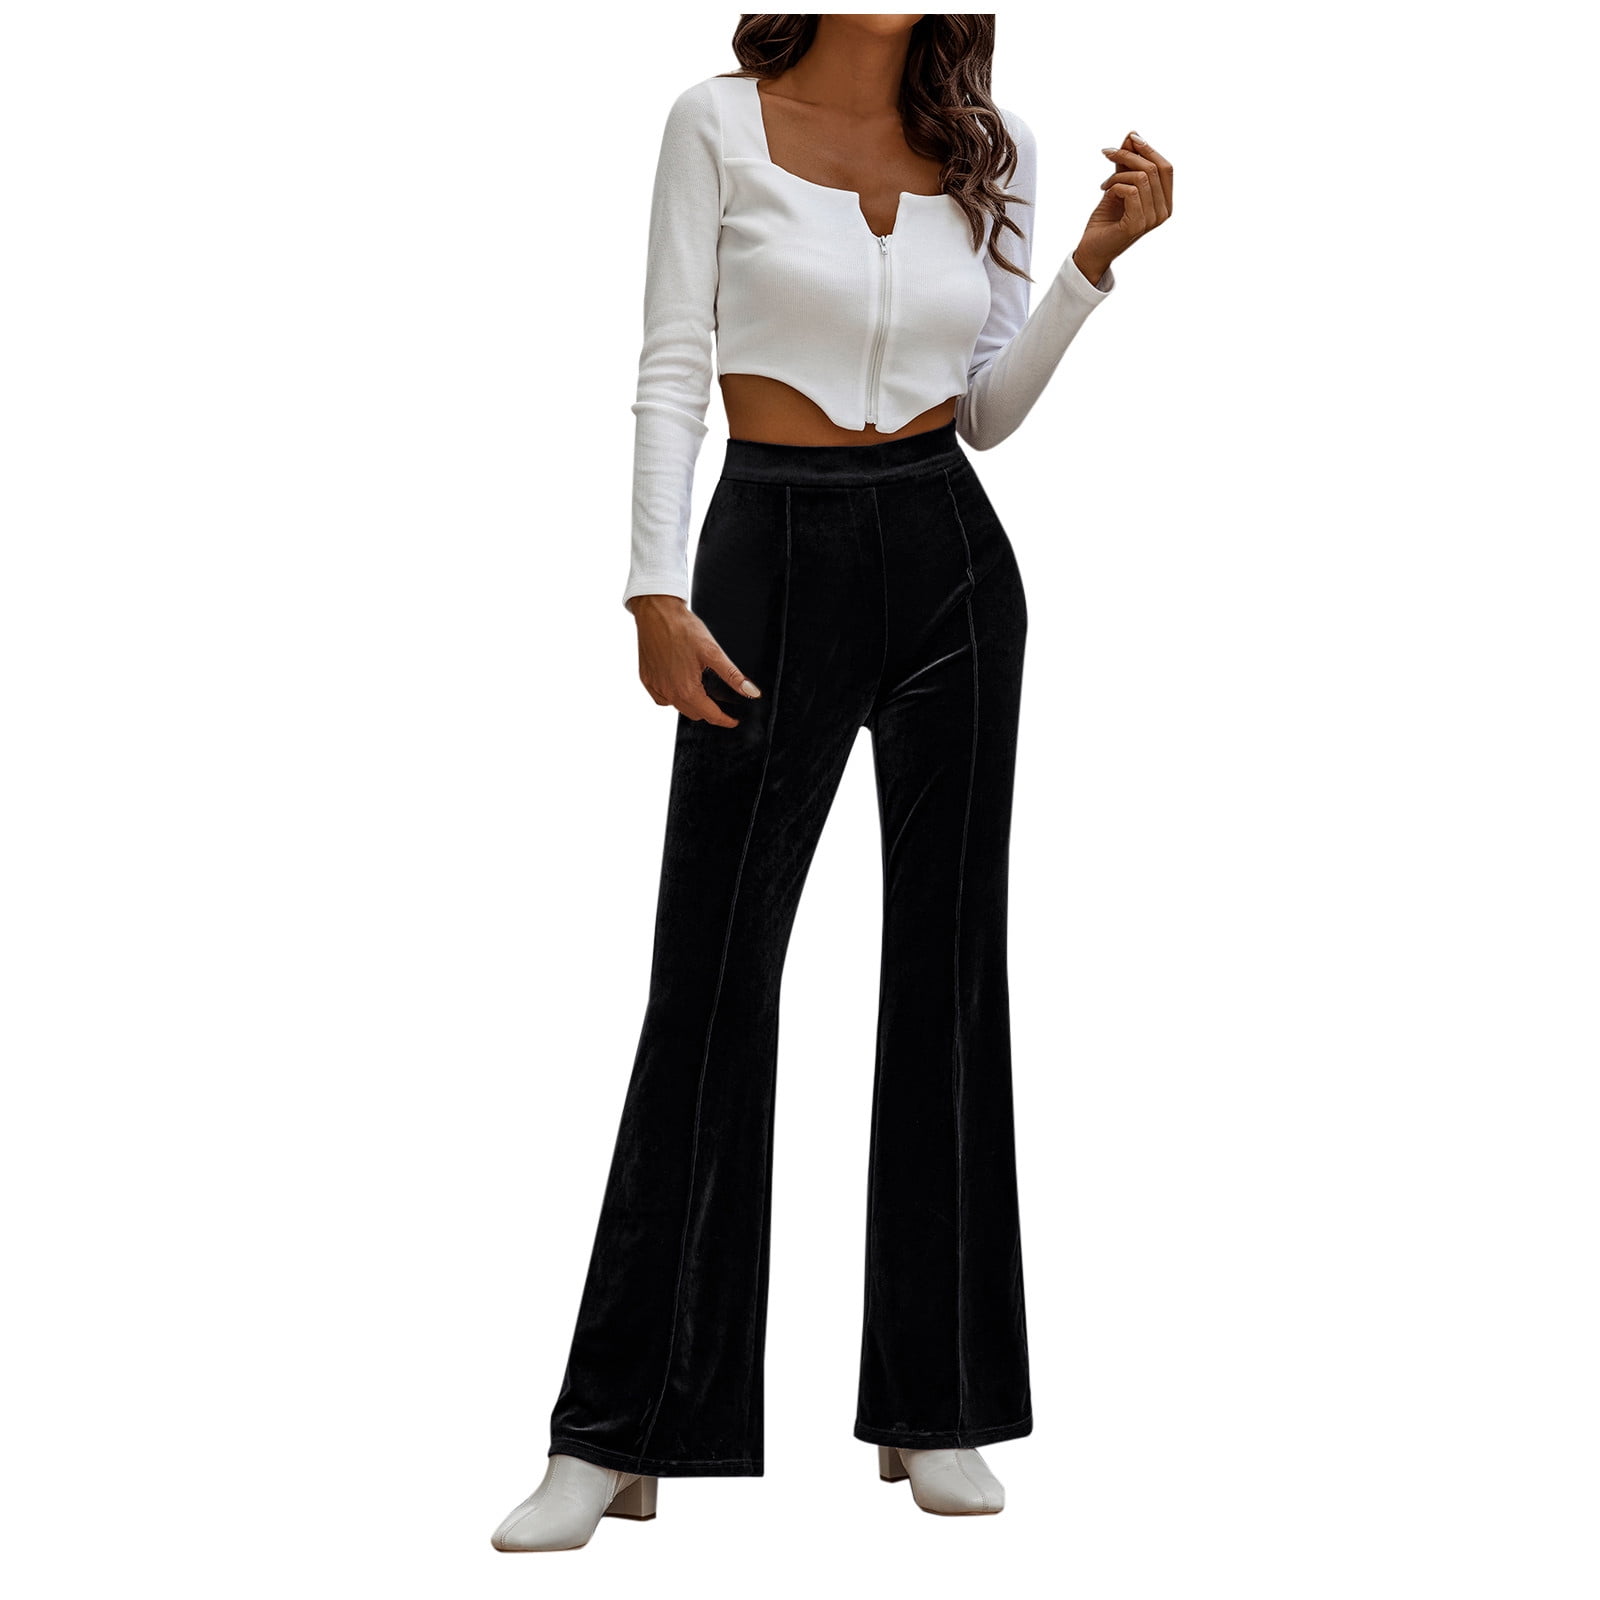 Hfyihgf High Waisted Velvet Flare Pants for Women Elastic Business Casual  Work Long Pants Solid Color Bell Bottom Trousers(Wine,S)